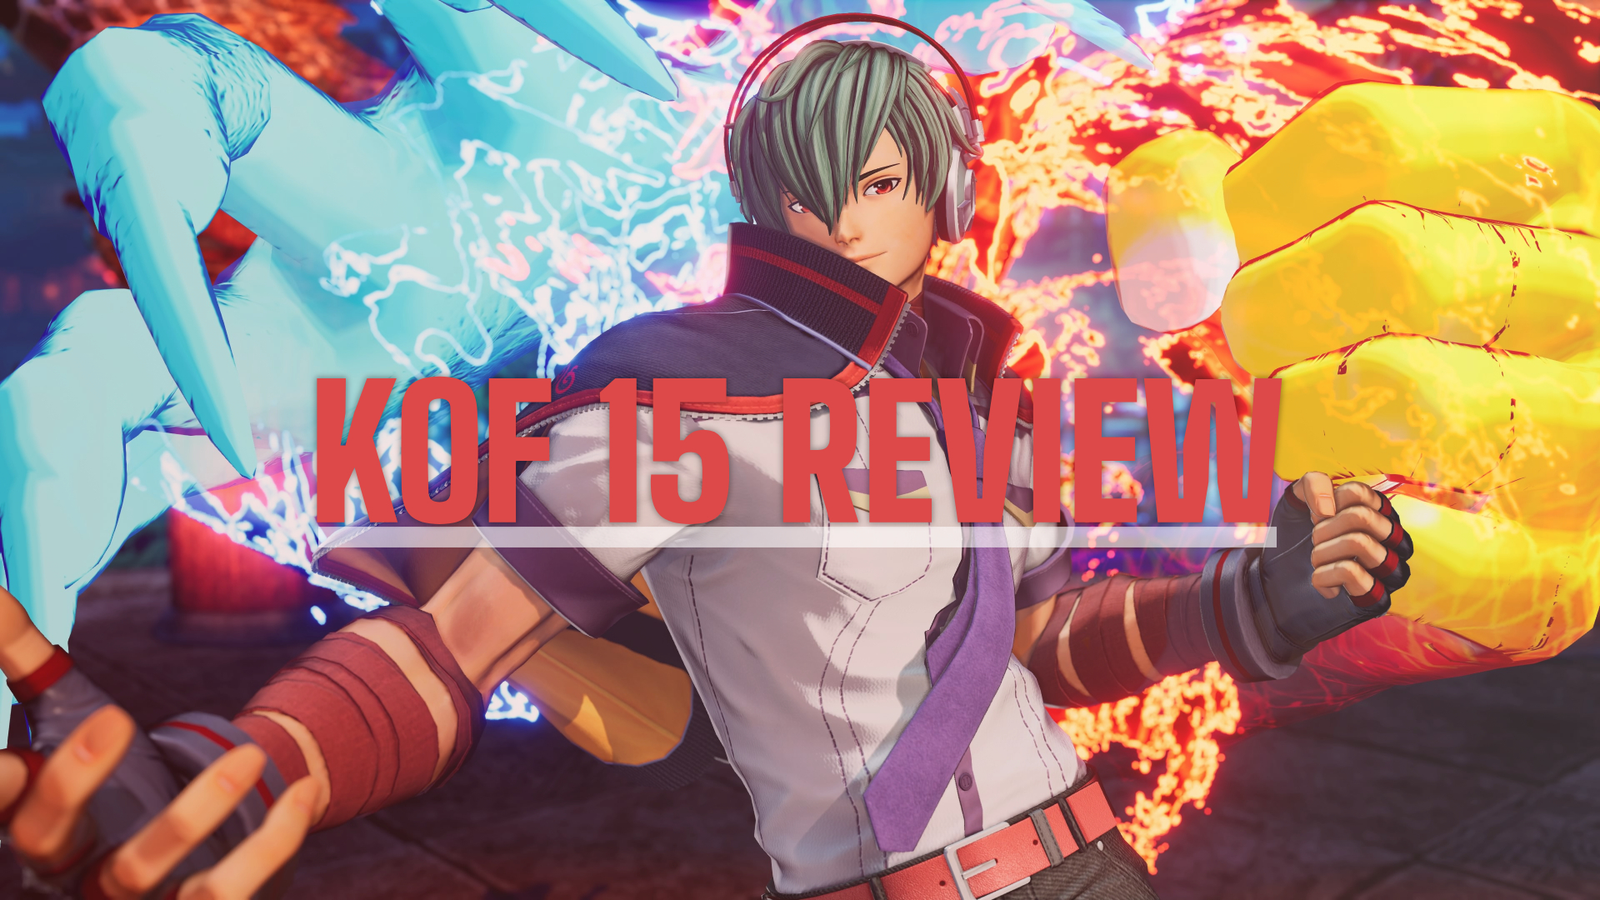 Review — The King of Fighters XV. The King of Fighters tournament